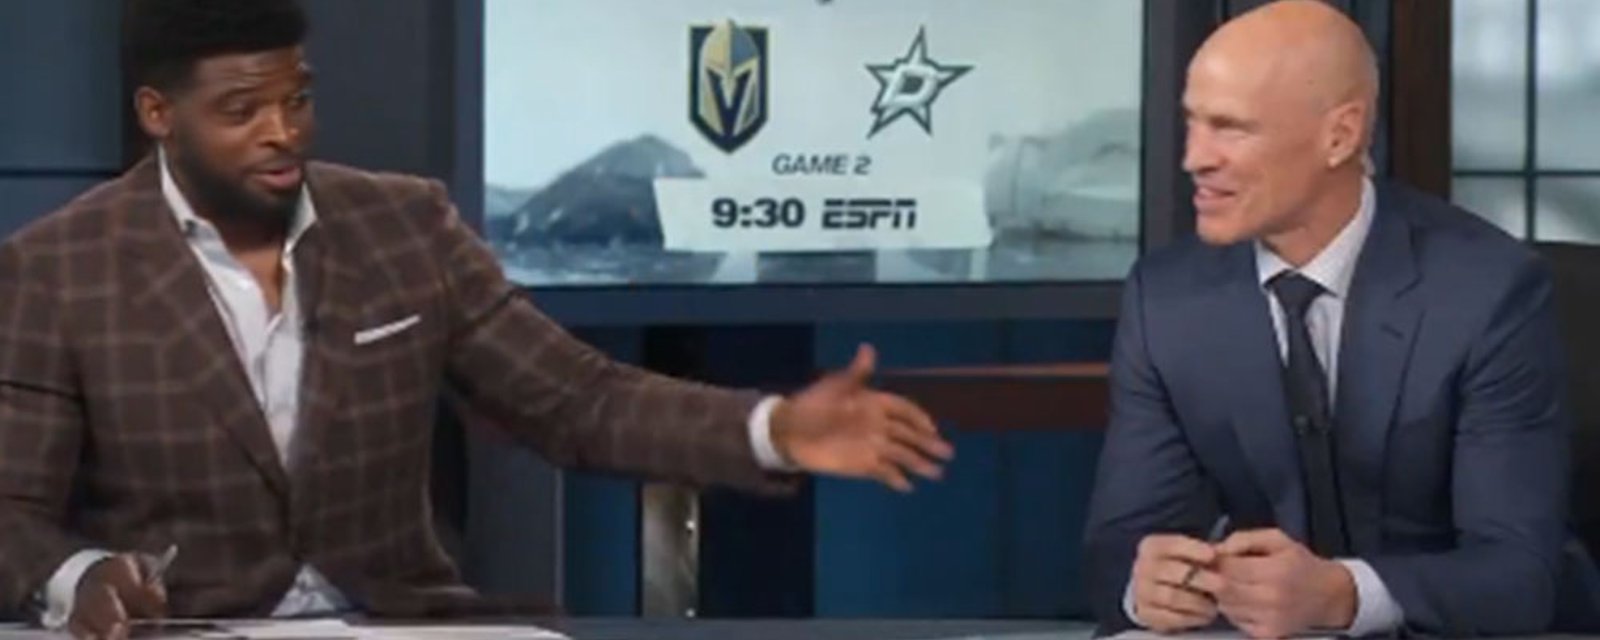 Subban under criticism for talking about his 'manhood' on live TV